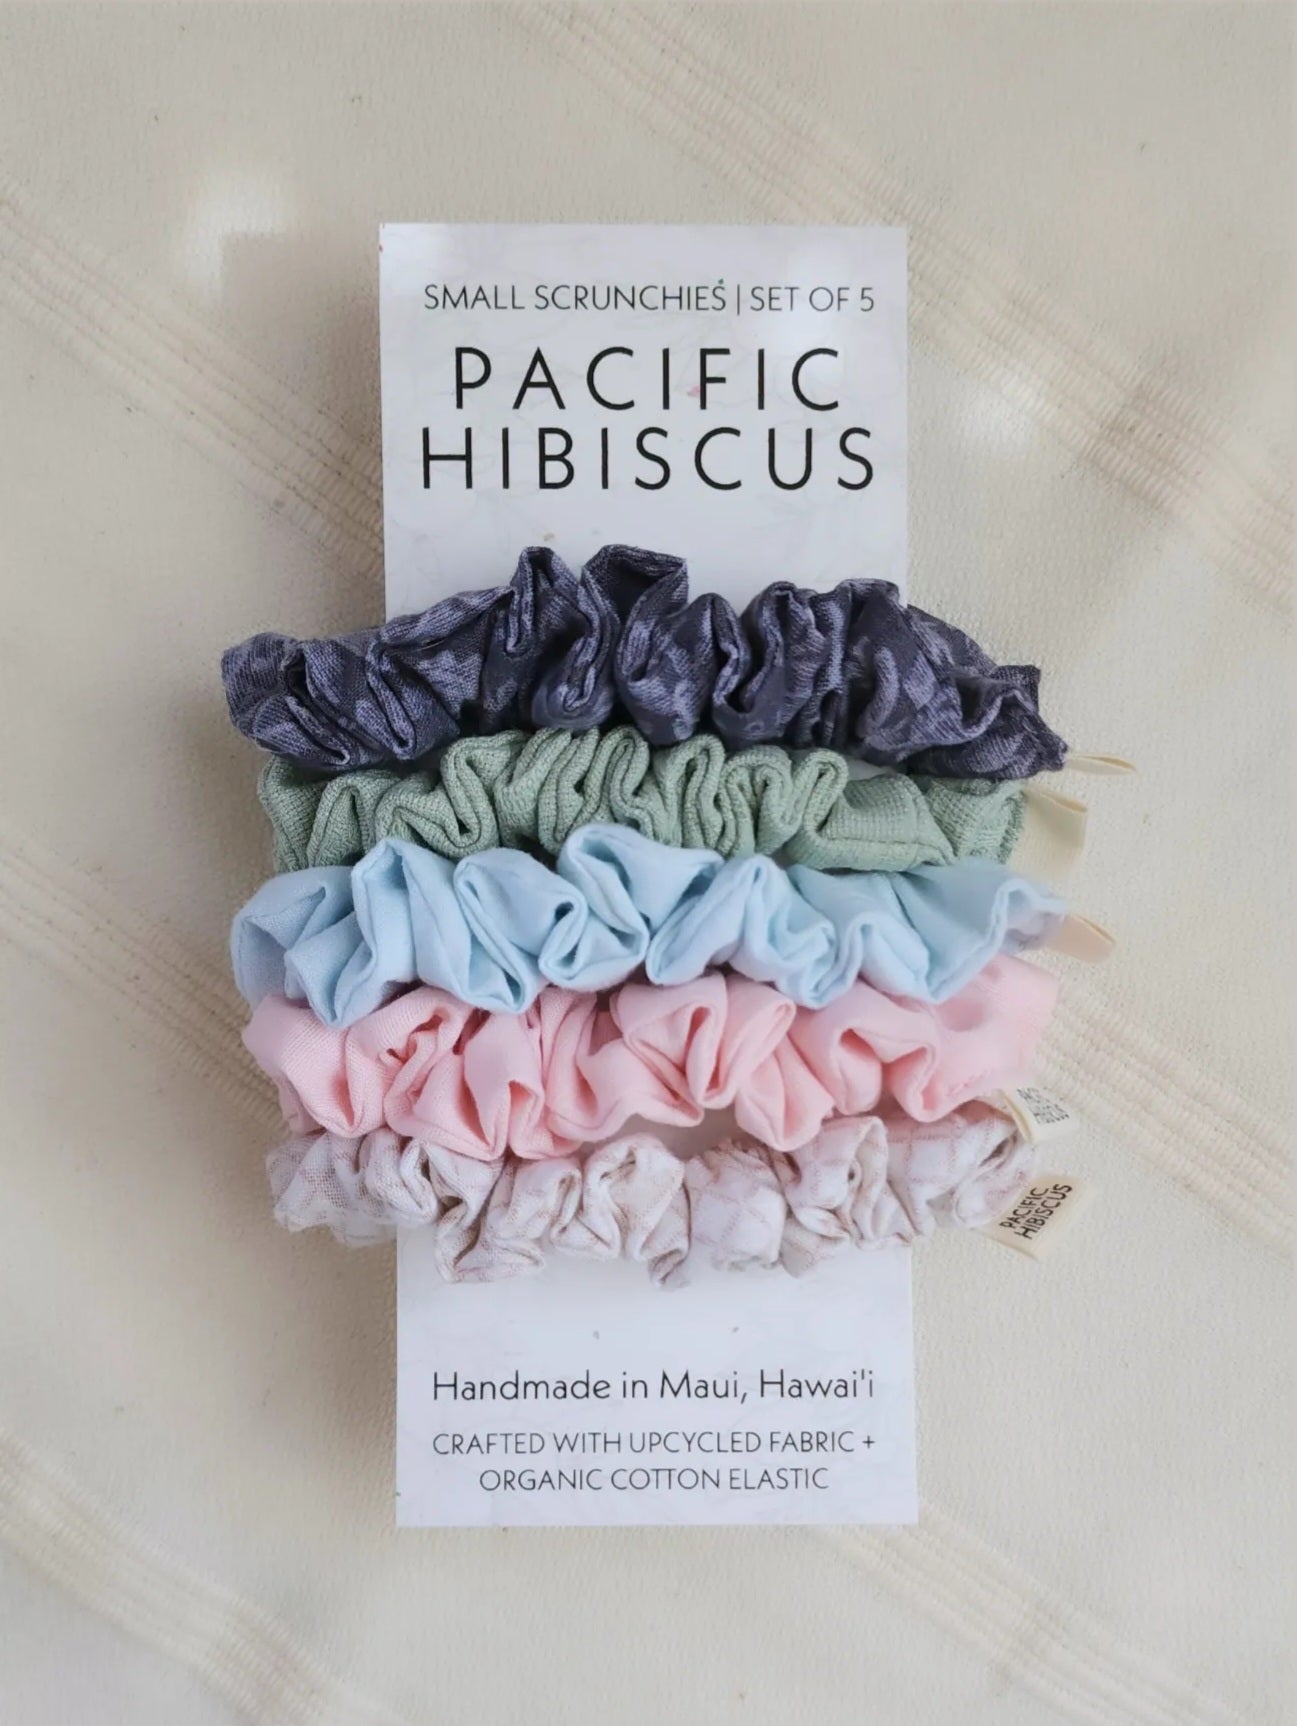 SMALL SCRUNCHIES | SET OF 5 | Blossom